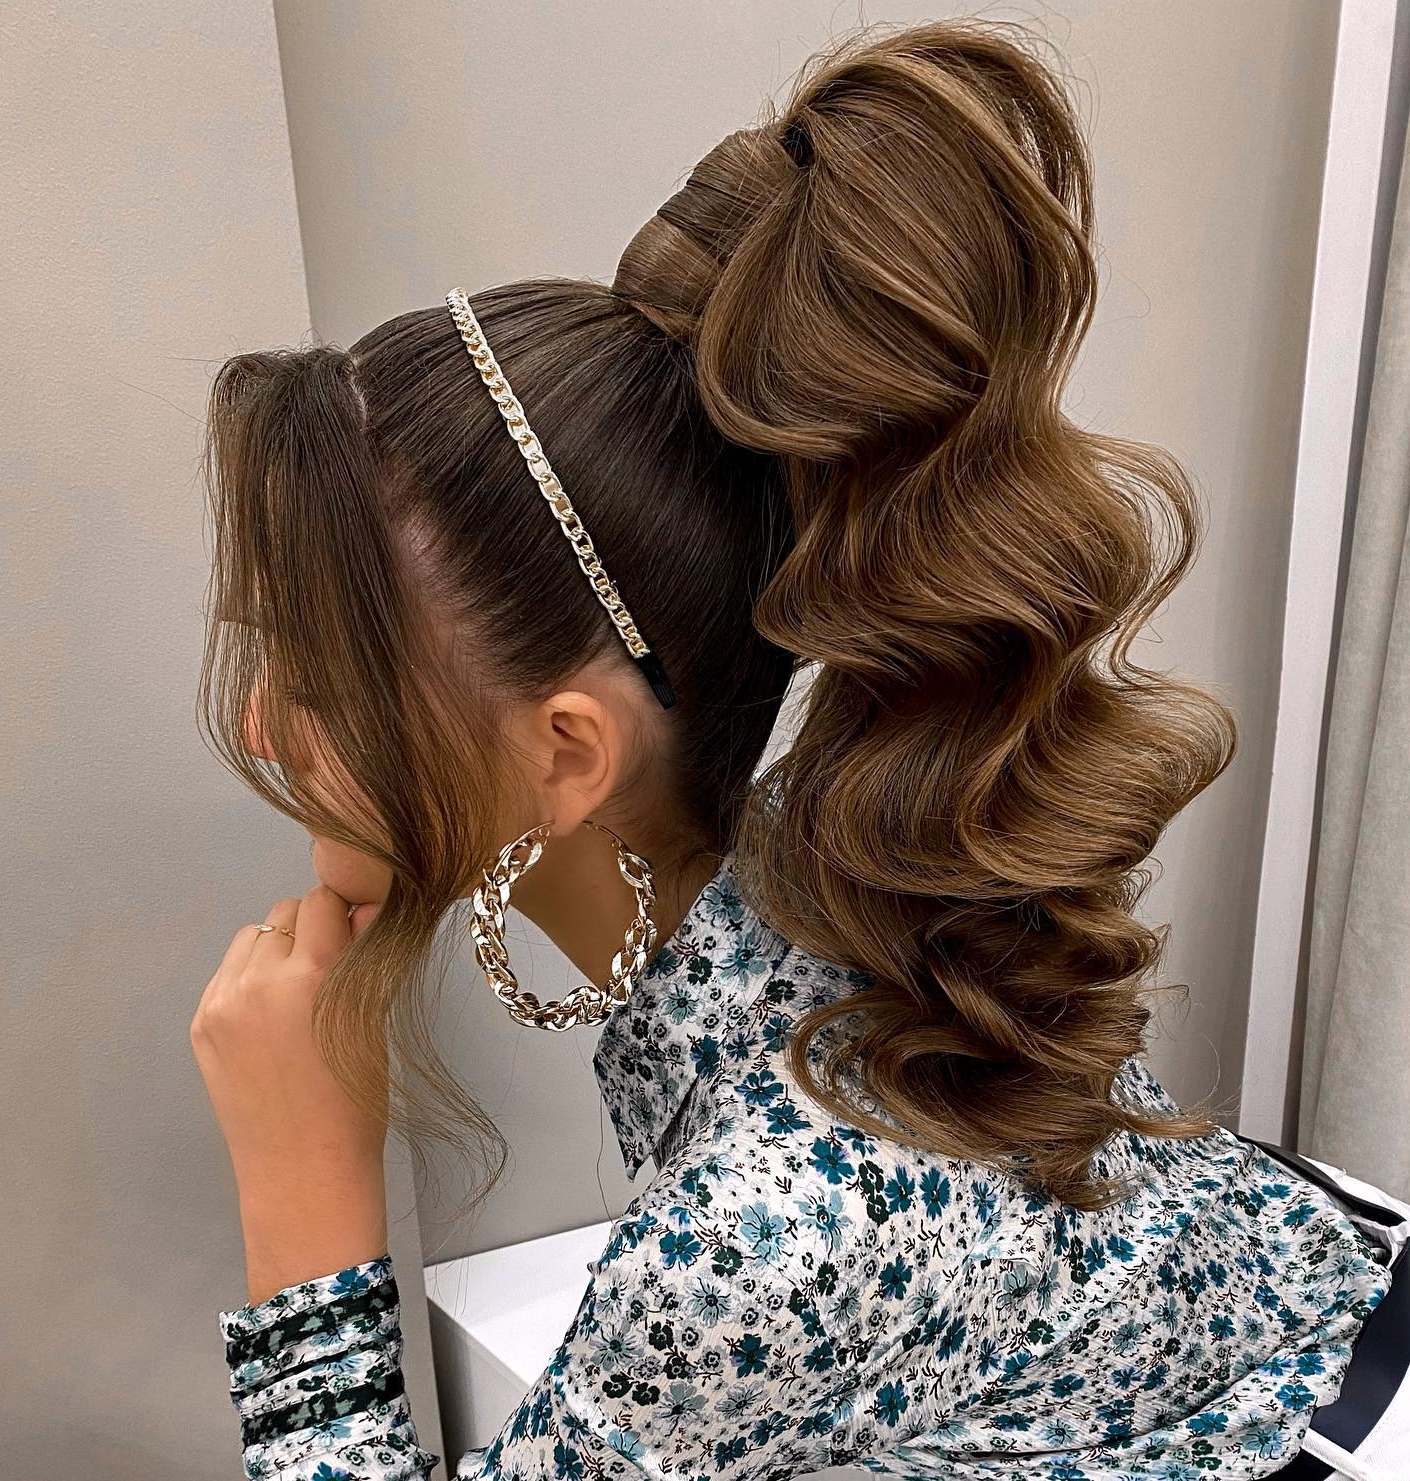 A High Ponytail Hairstyles Trend | LoveHairStyles.com